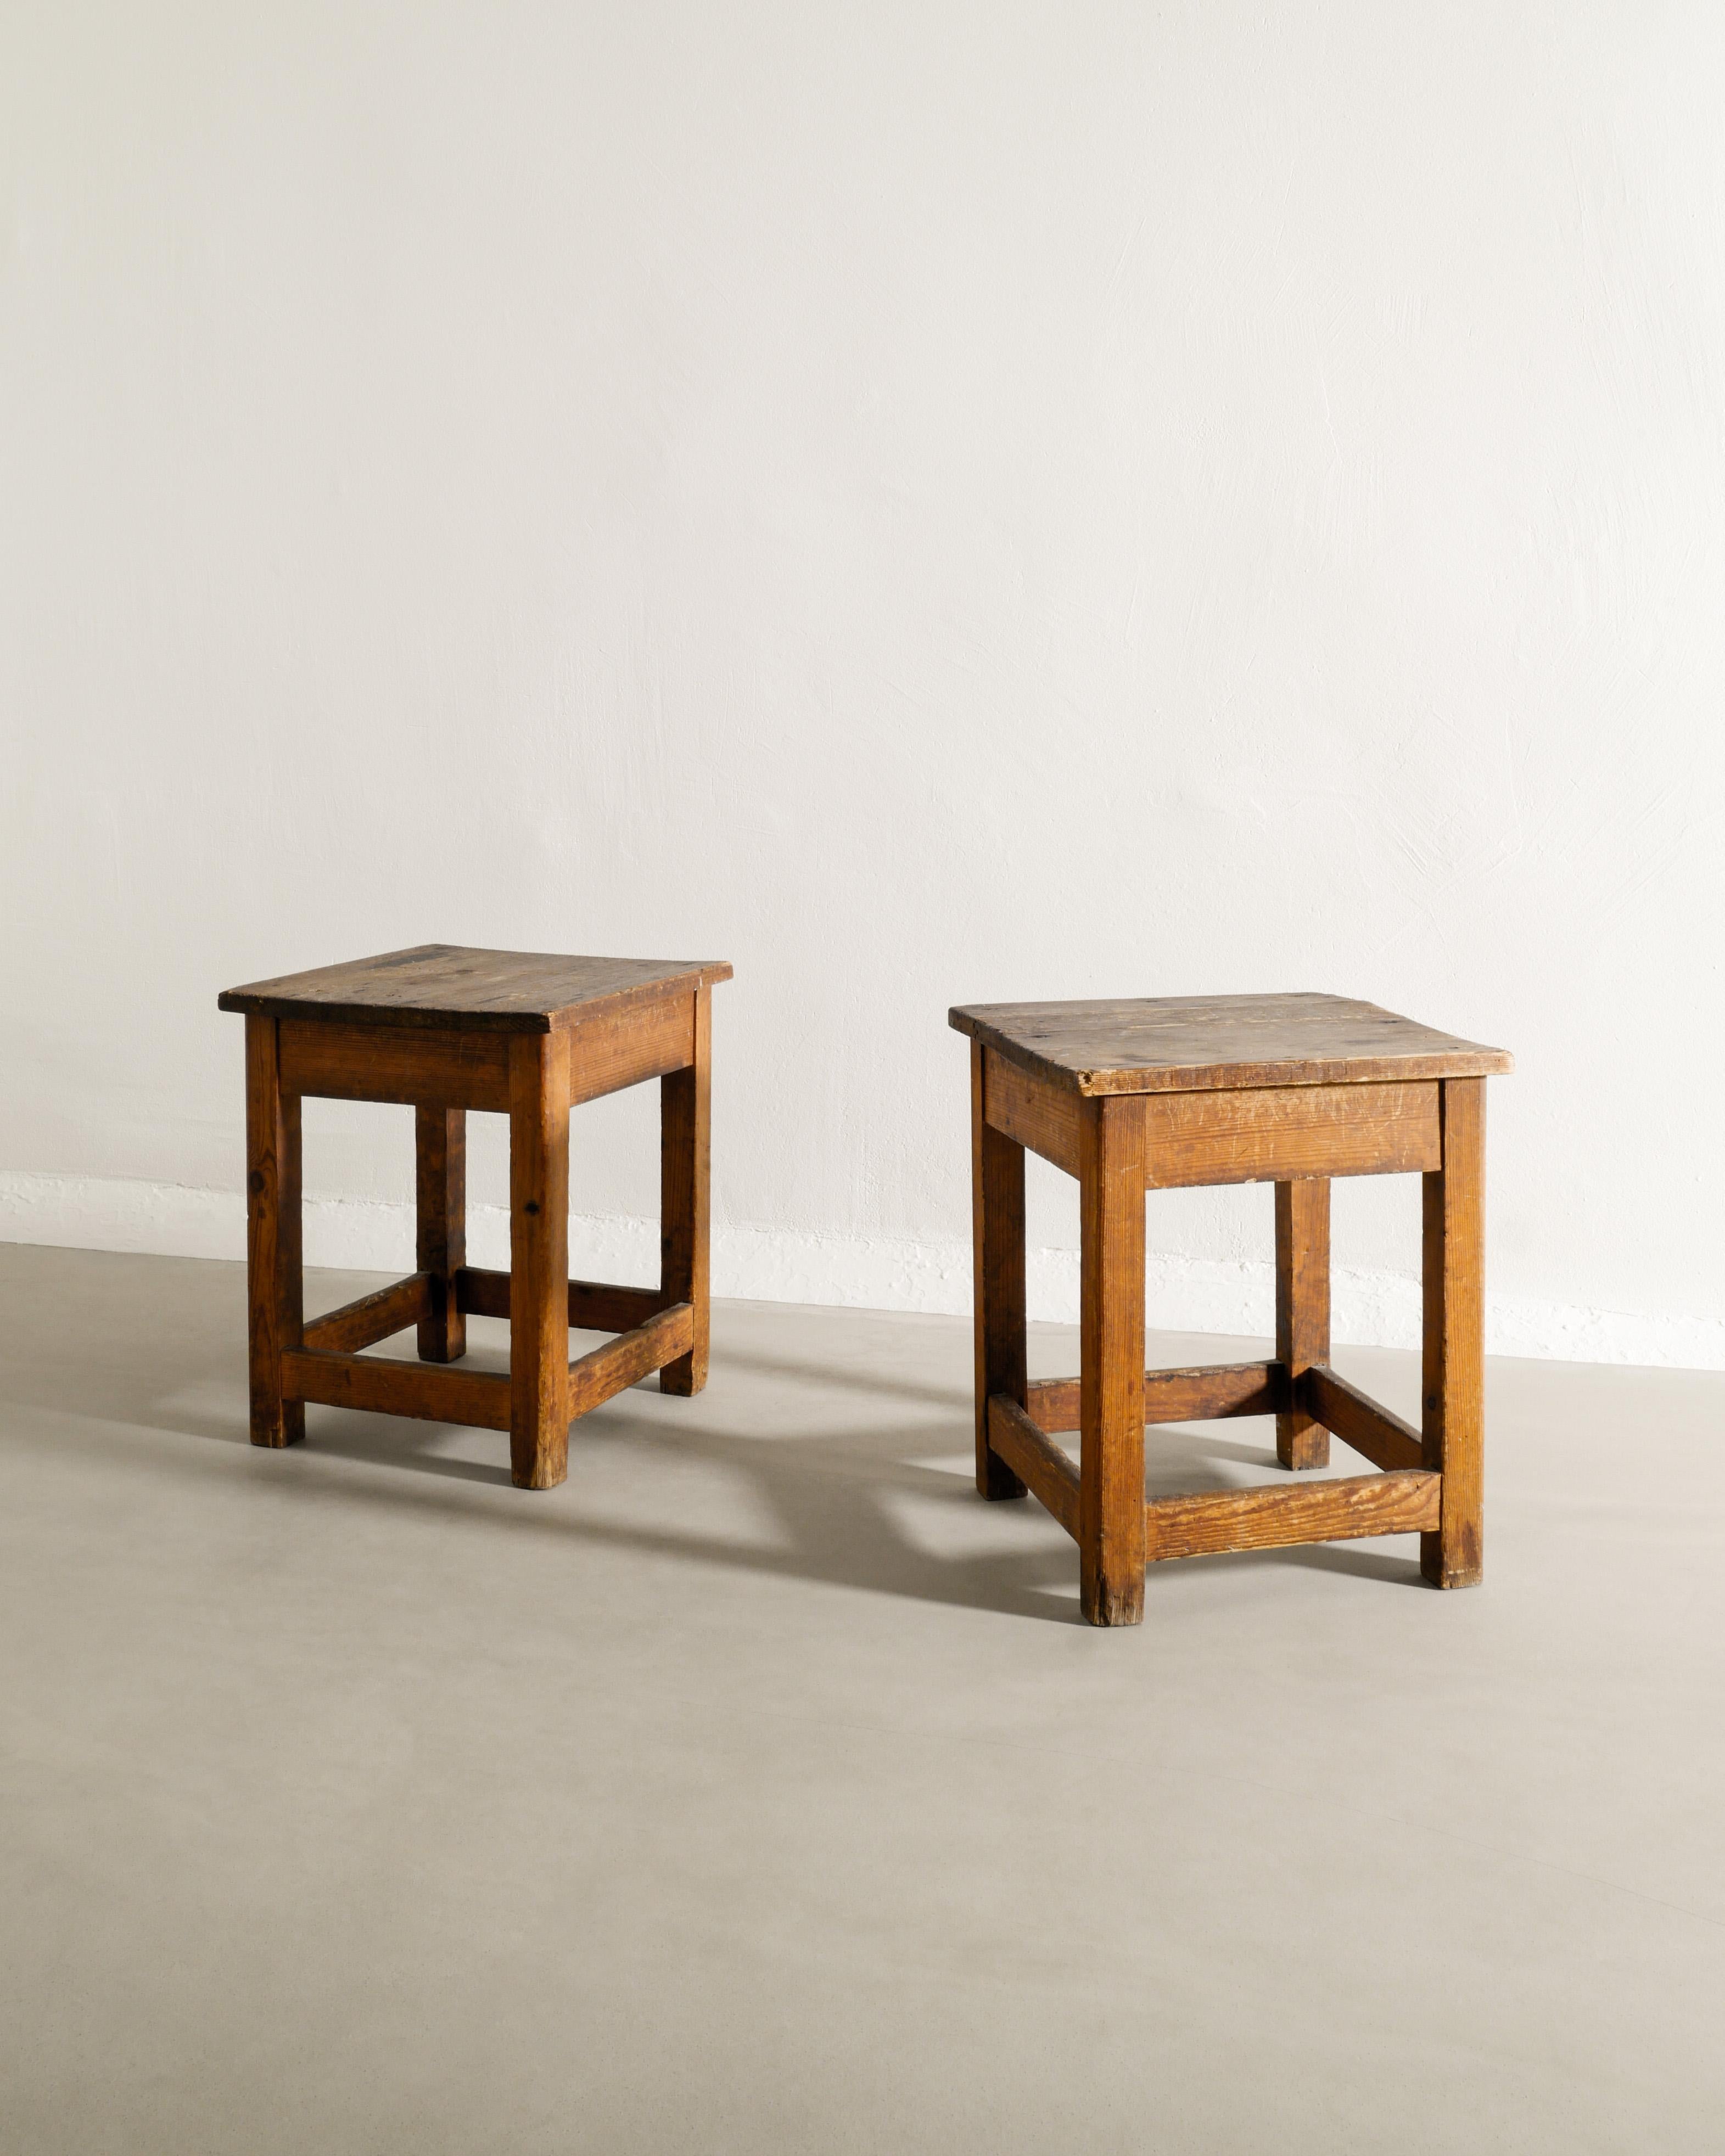 Rare pair of decorative and rustic squared wooden bed side tables in pine produced in Sweden early 1900s. In good original condition with nice patina. 

Dimensions: H: 45 cm / 17.70